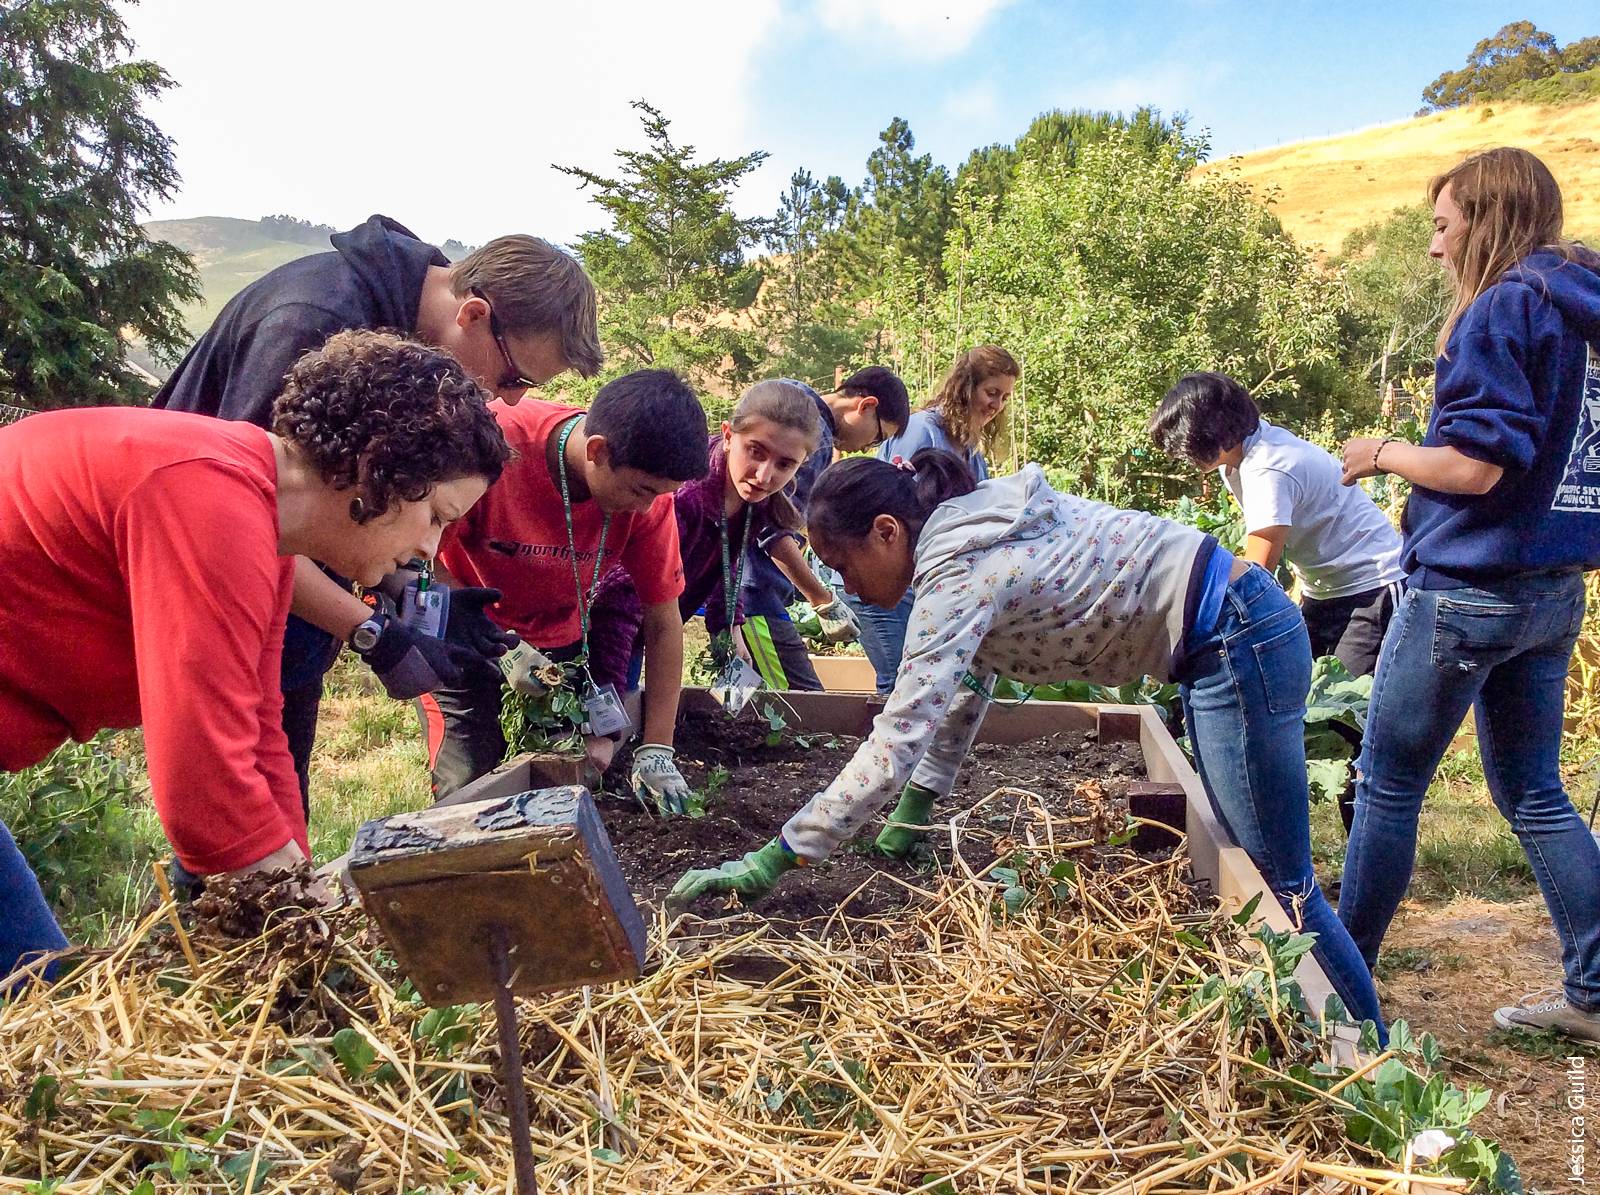 A pilot study conducted by UC Cooperative Extension showed that the Healthy Living Ambassador Program increased children's interest in science and gardening and that teen teachers developed self-efficacy in healthy behaviors.